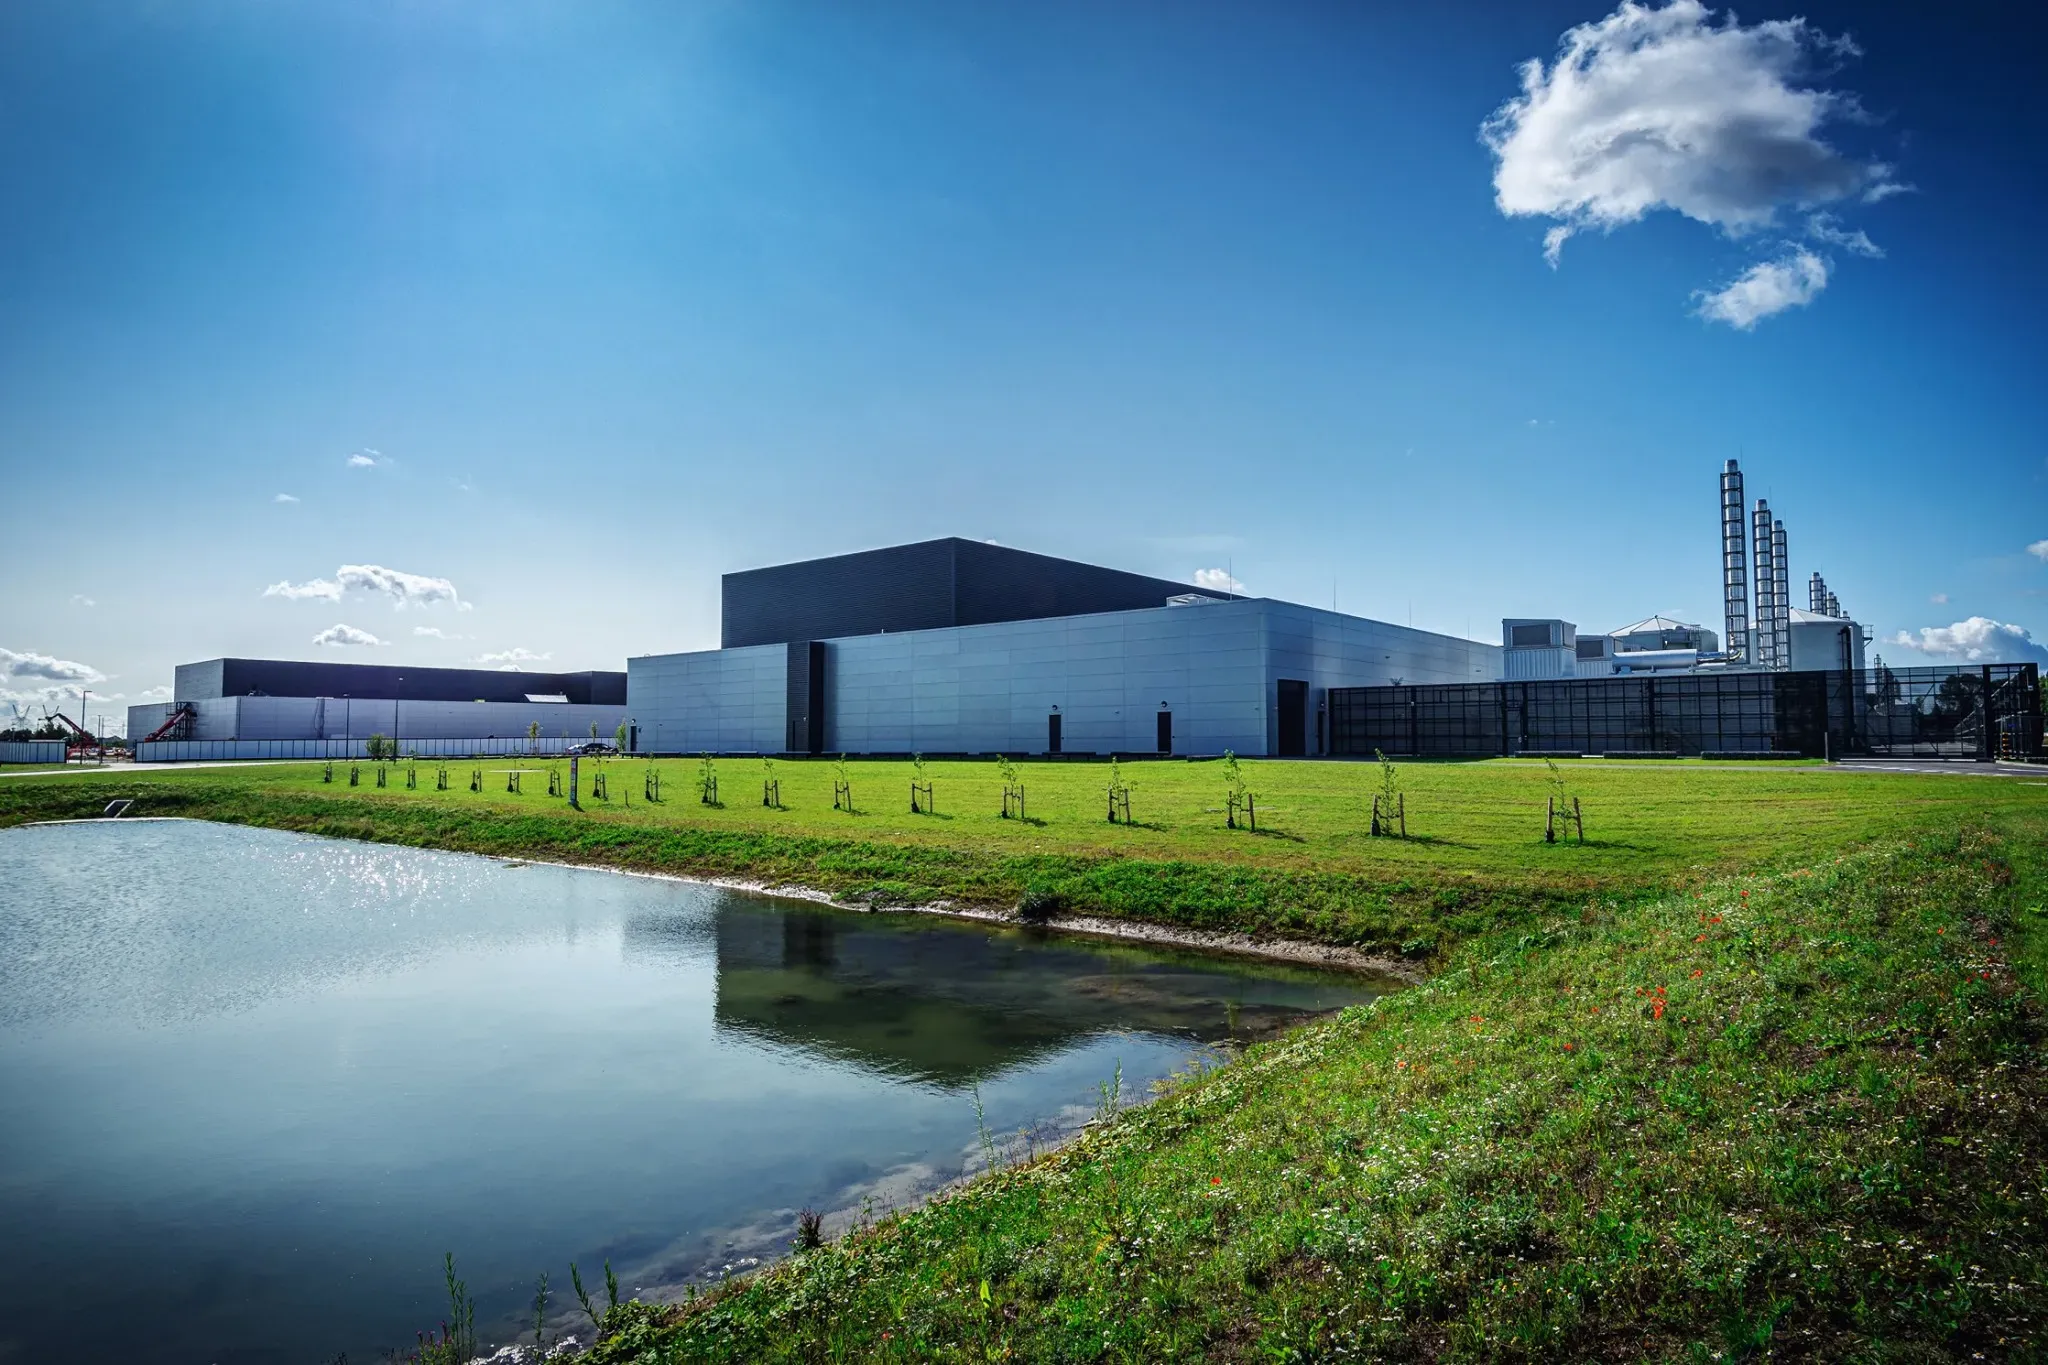 
Meta's data center in Odense, Denmark.
<br>
Such data centers pack enough compute
to allow companies to train large AI models,
they also have significant carbon footprints.
